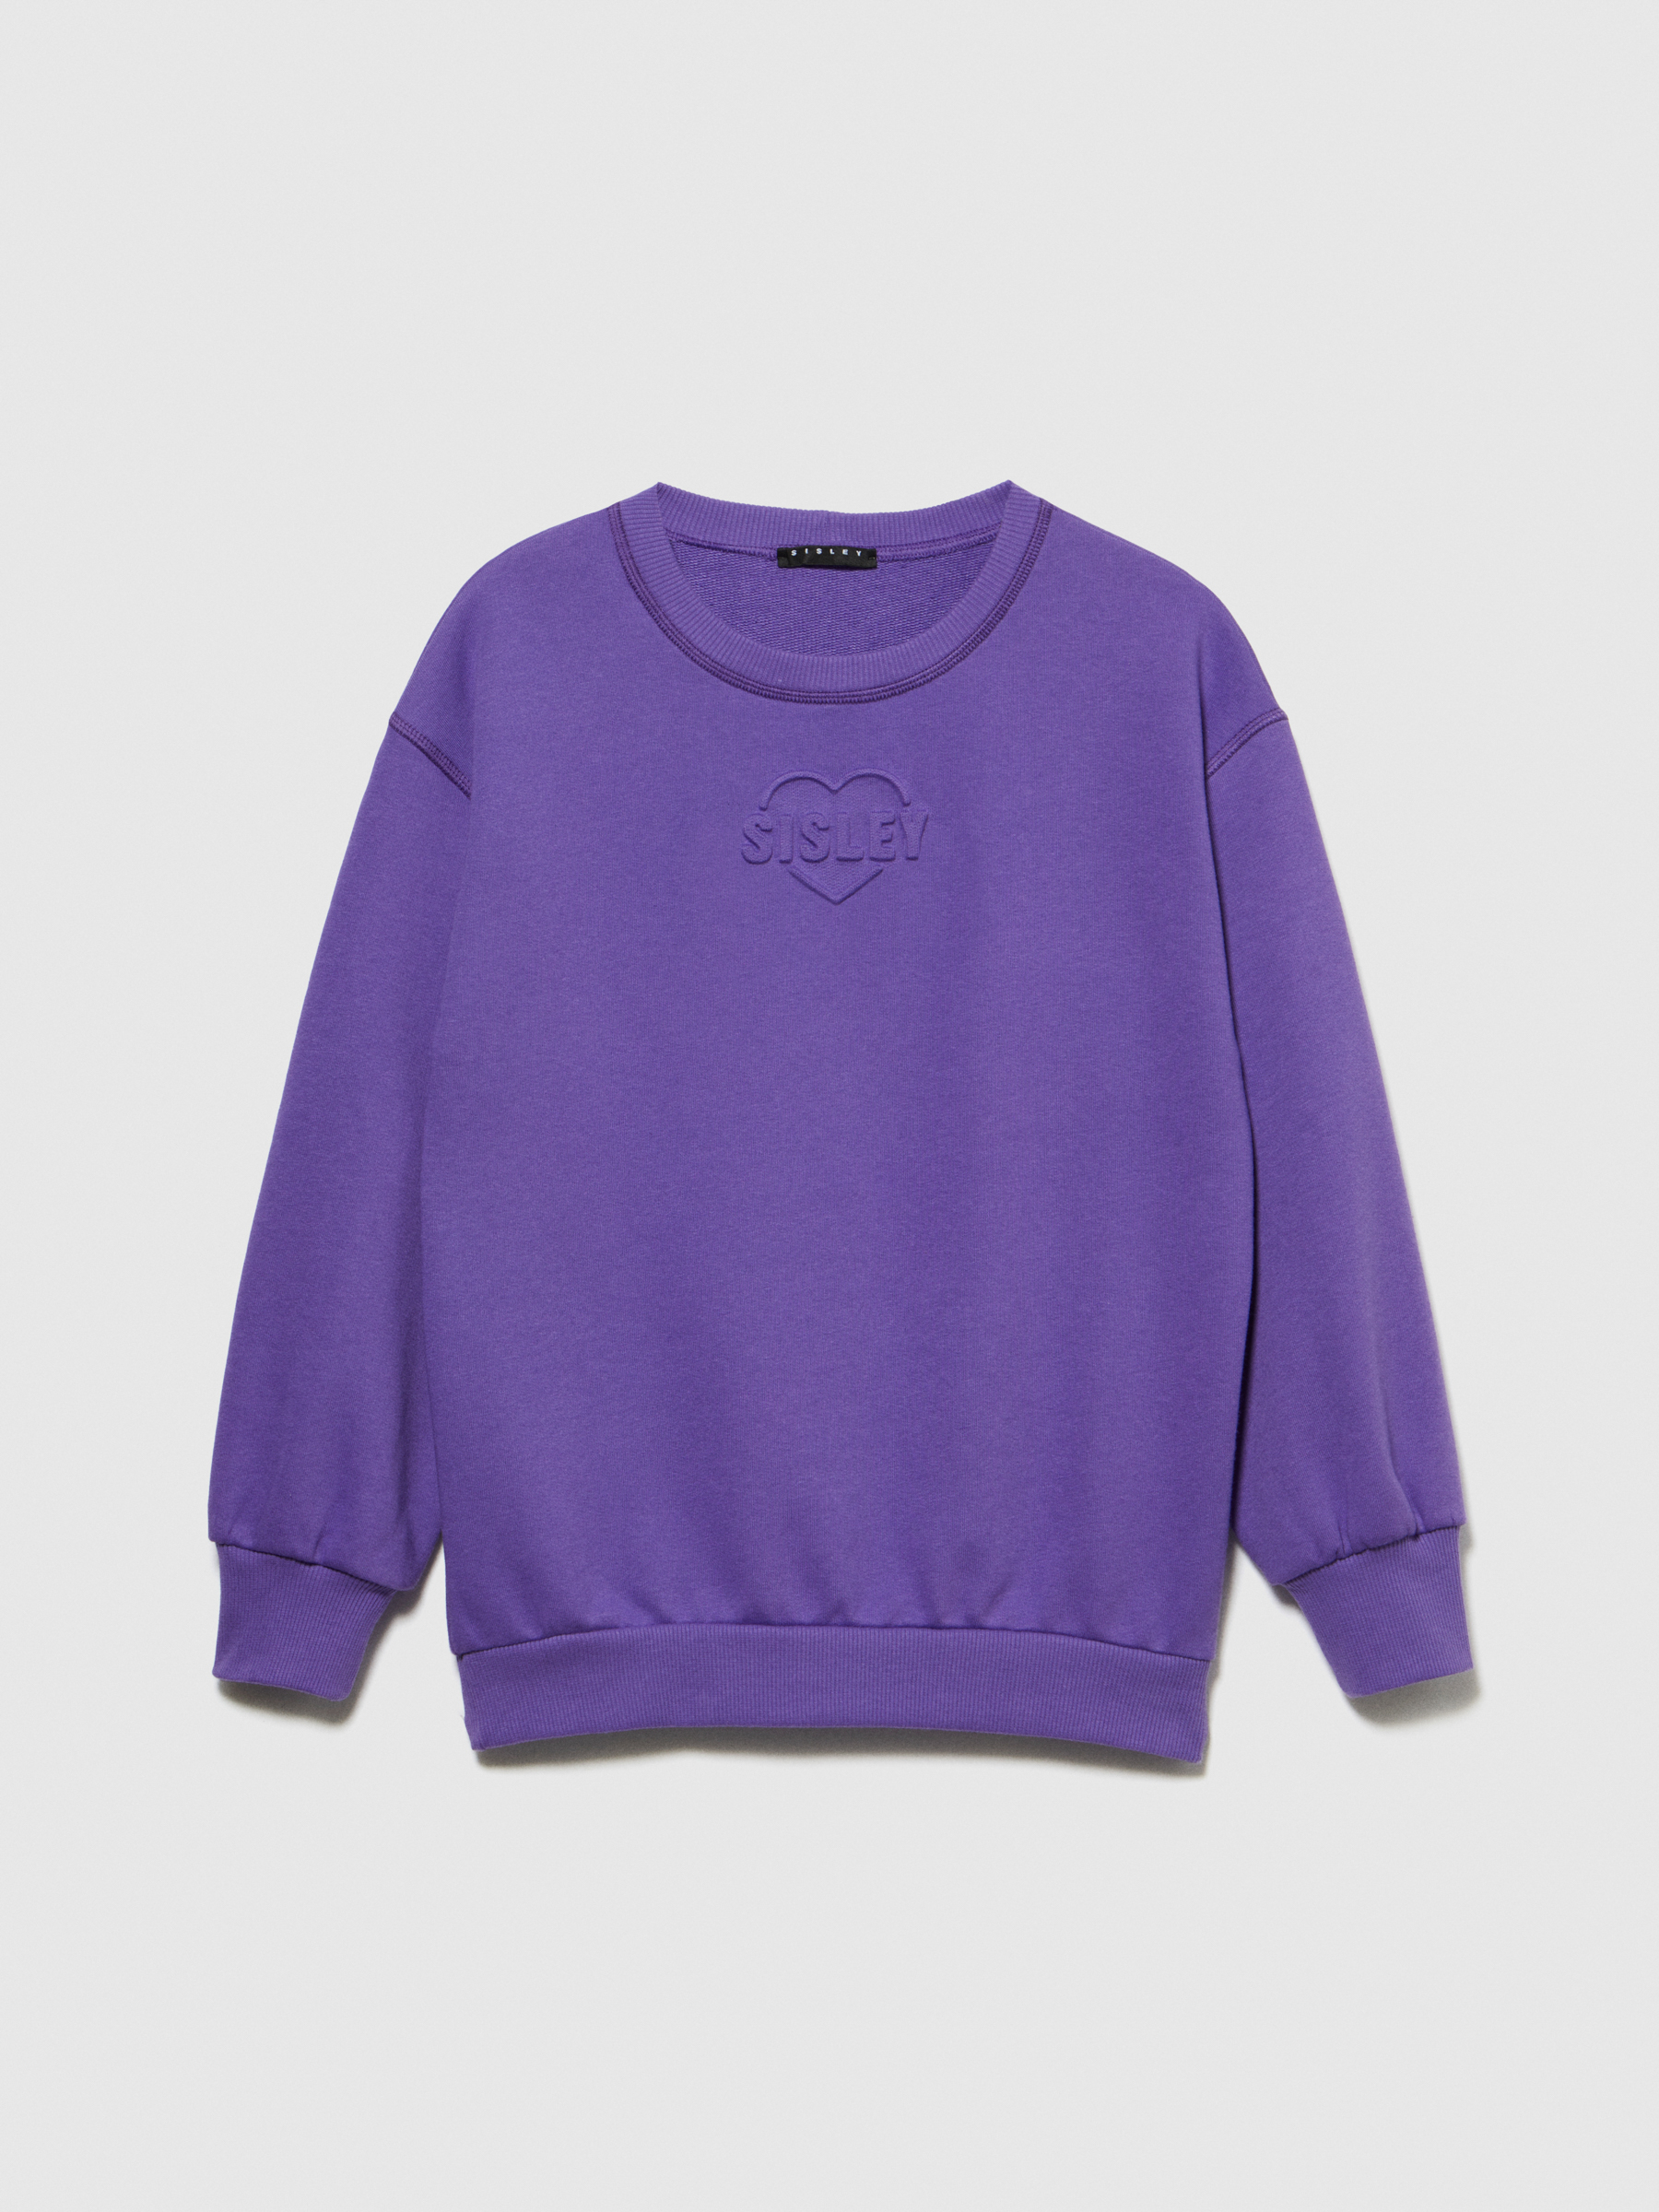 Sisley Young - Sweatshirt With Embossed Print, Woman, Violet, Size: KL